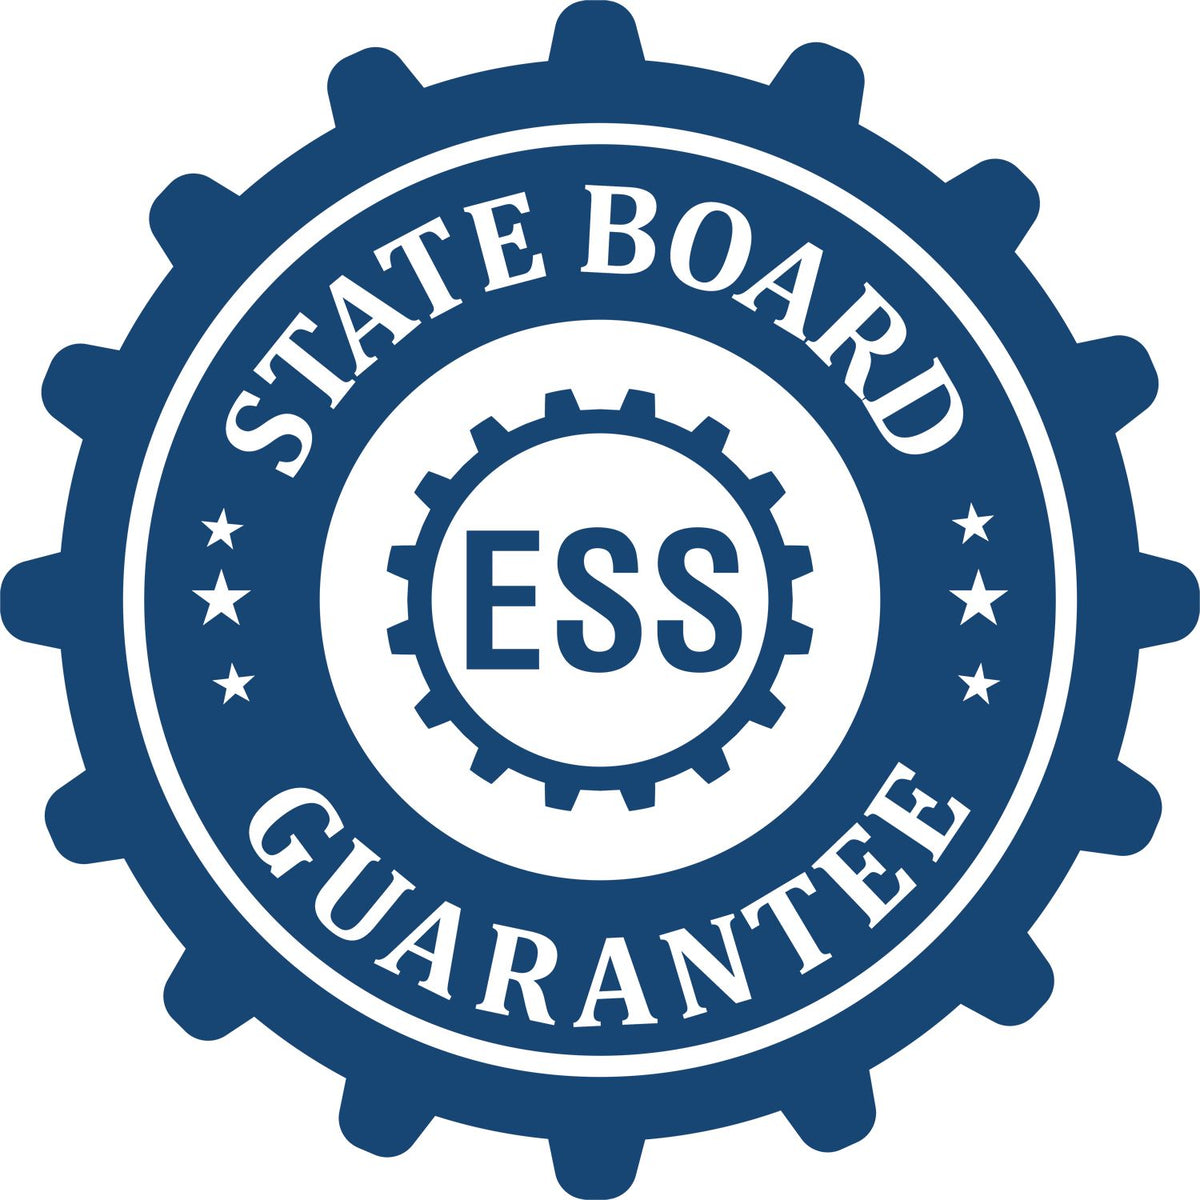 An emblem in a gear shape illustrating a state board guarantee for the State of Rhode Island Long Reach Architectural Embossing Seal product.